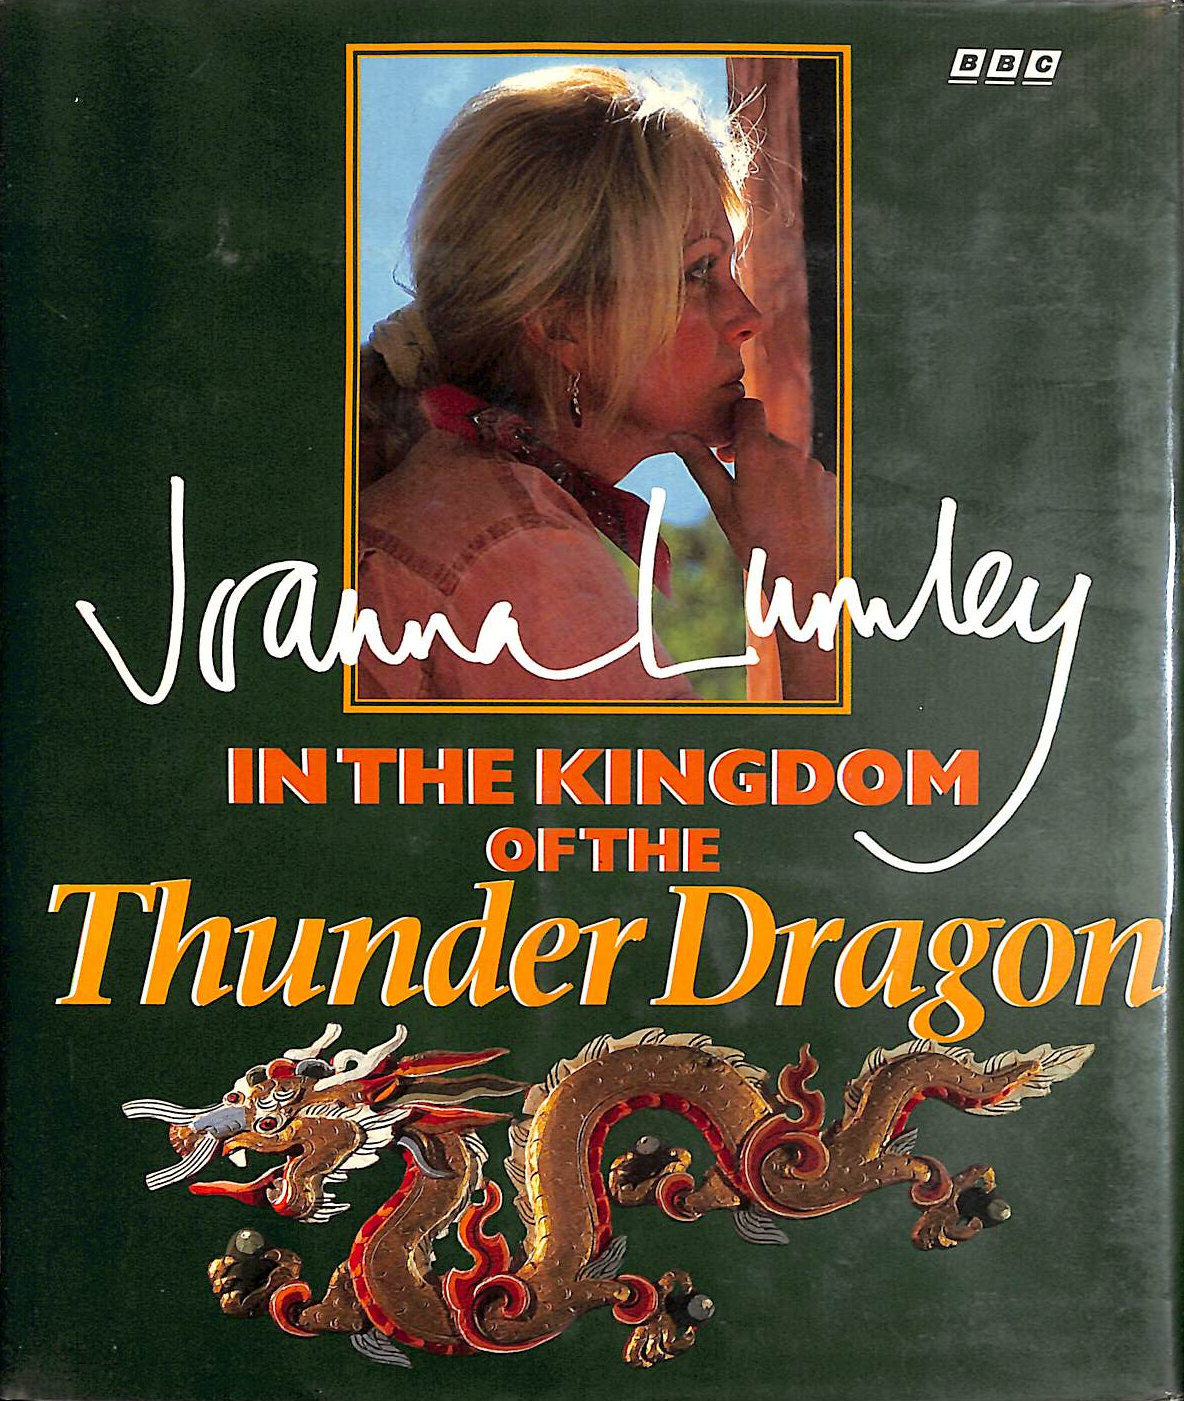 LUMLEY, JOANNA - In the Kingdom of the Thunder Dragon